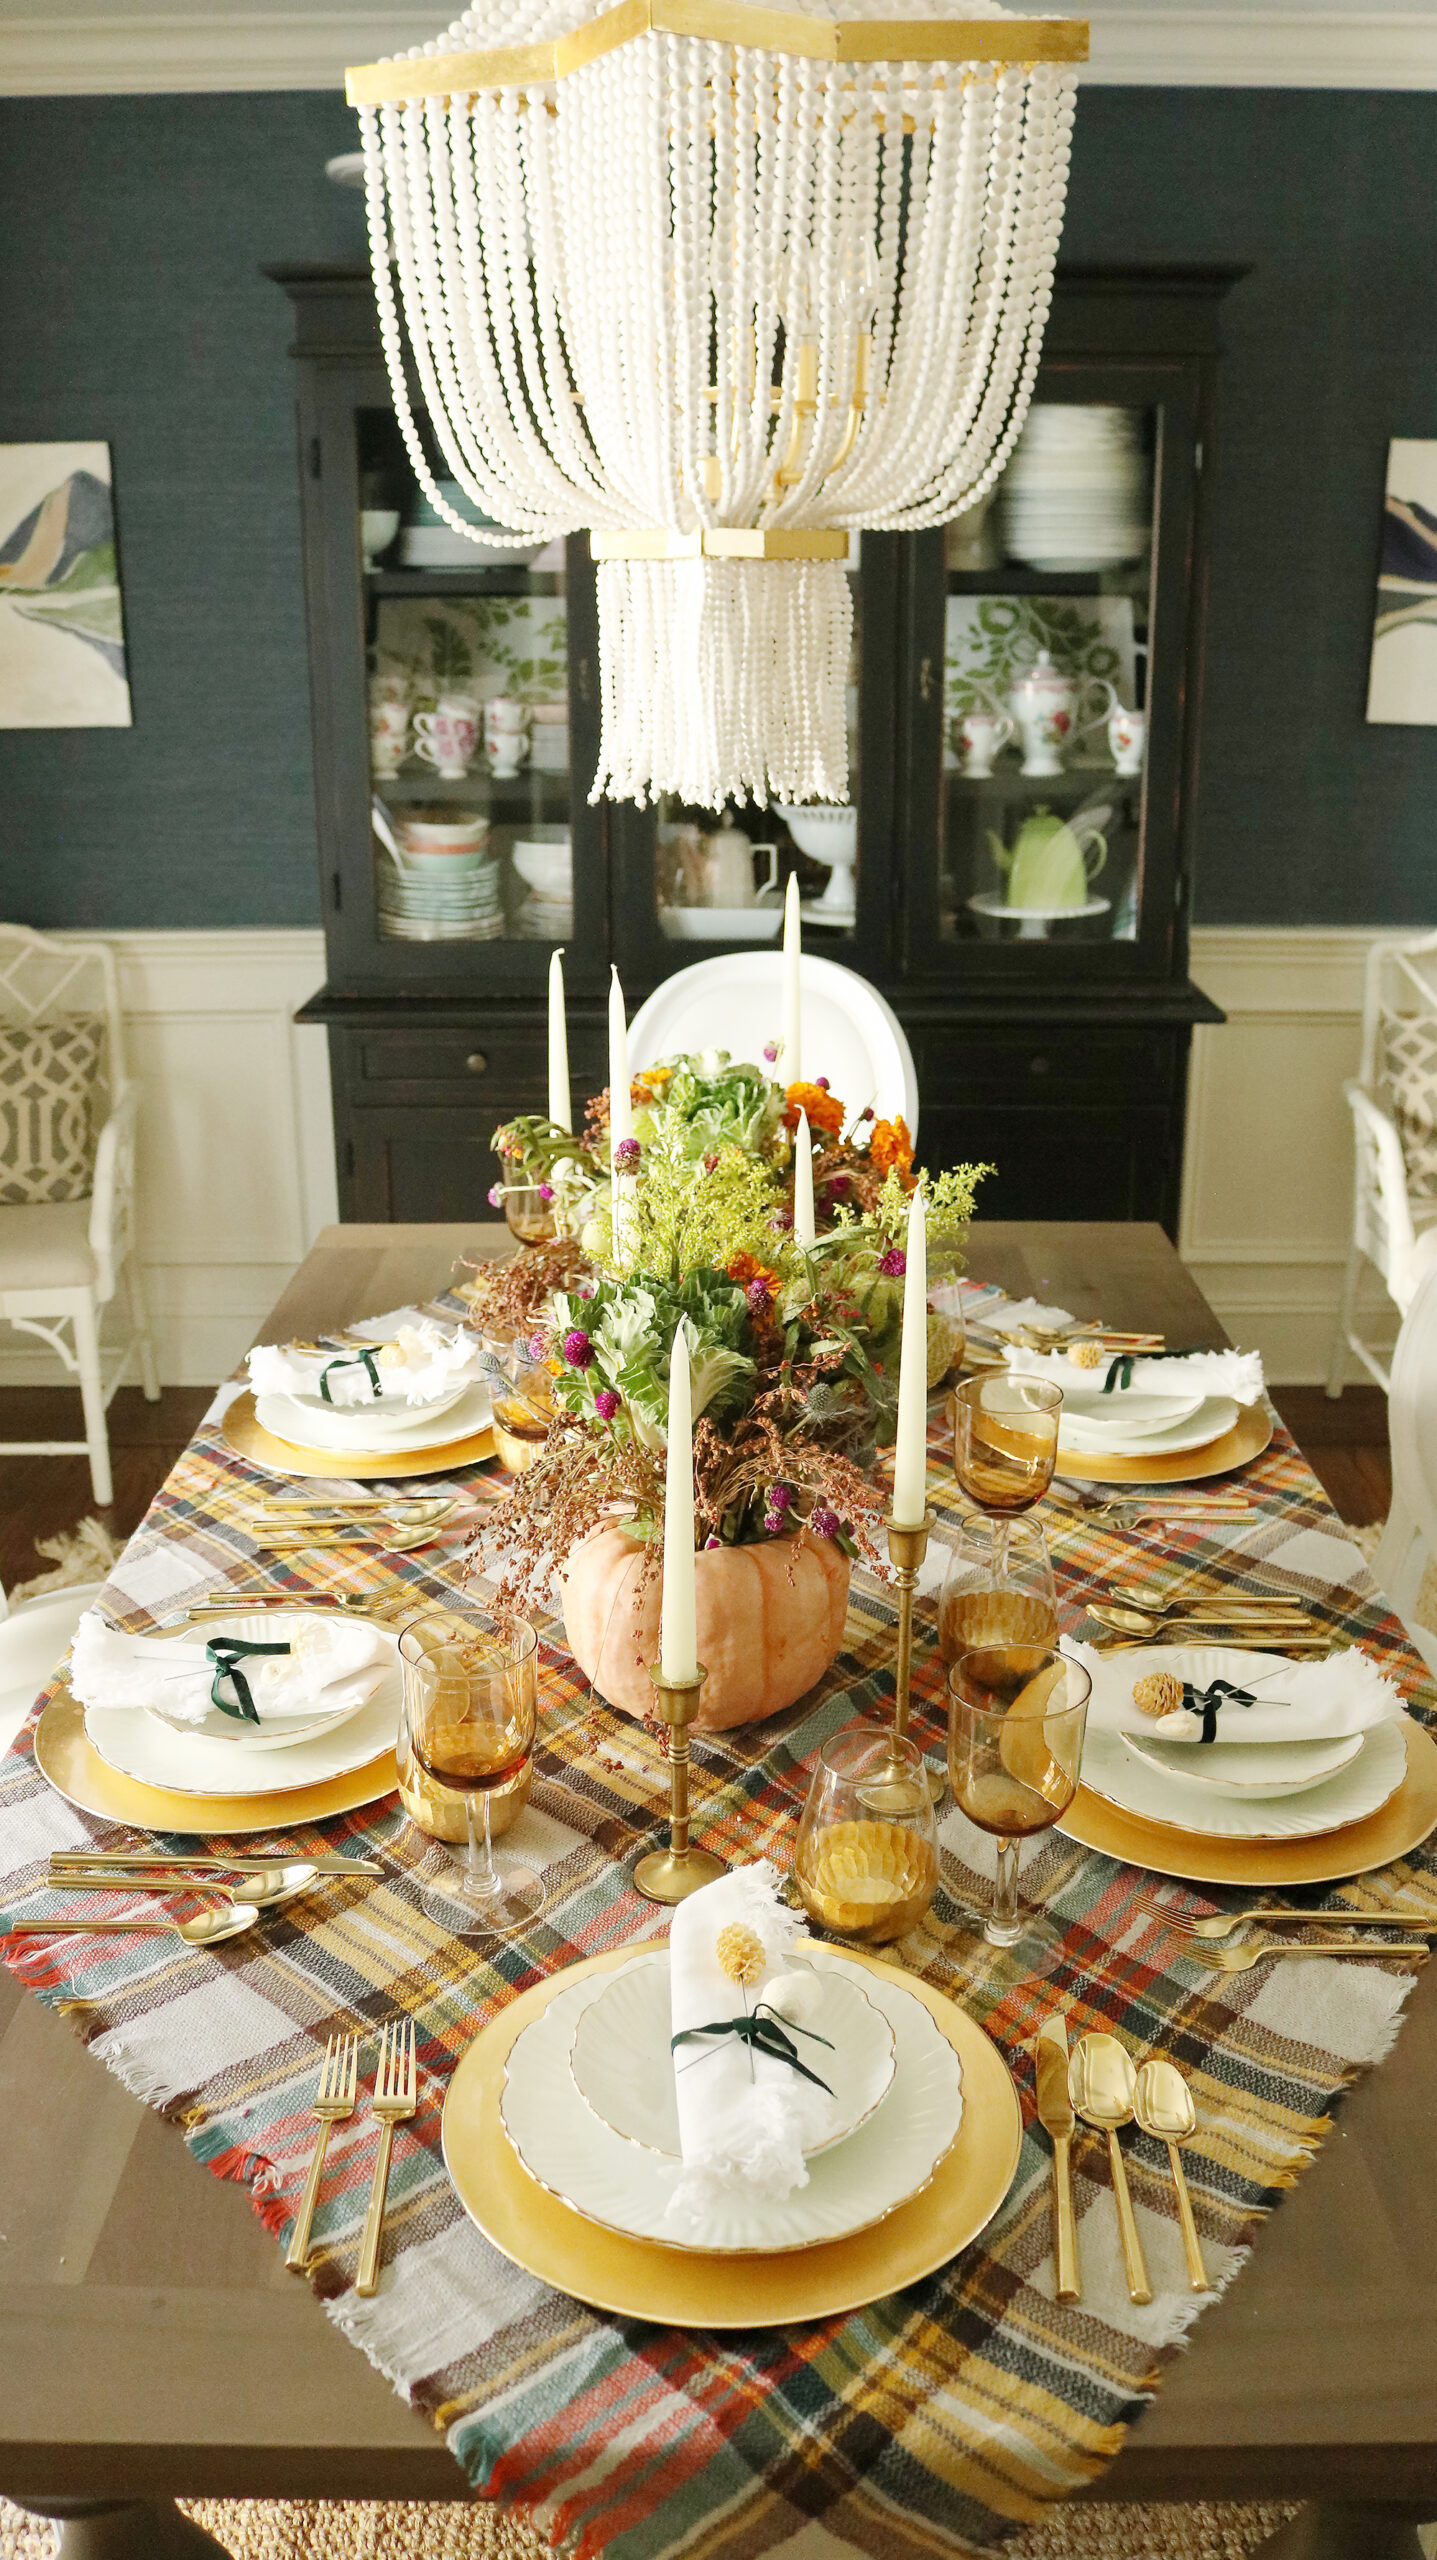 Pumpkin Gourd Flower Arrangements and Plaid Tablecloth for our Thanksgiving Tablescape makes it Fall Plaids for Thanksgiving || Darling Darleen Top CT Lifestyle Blogger